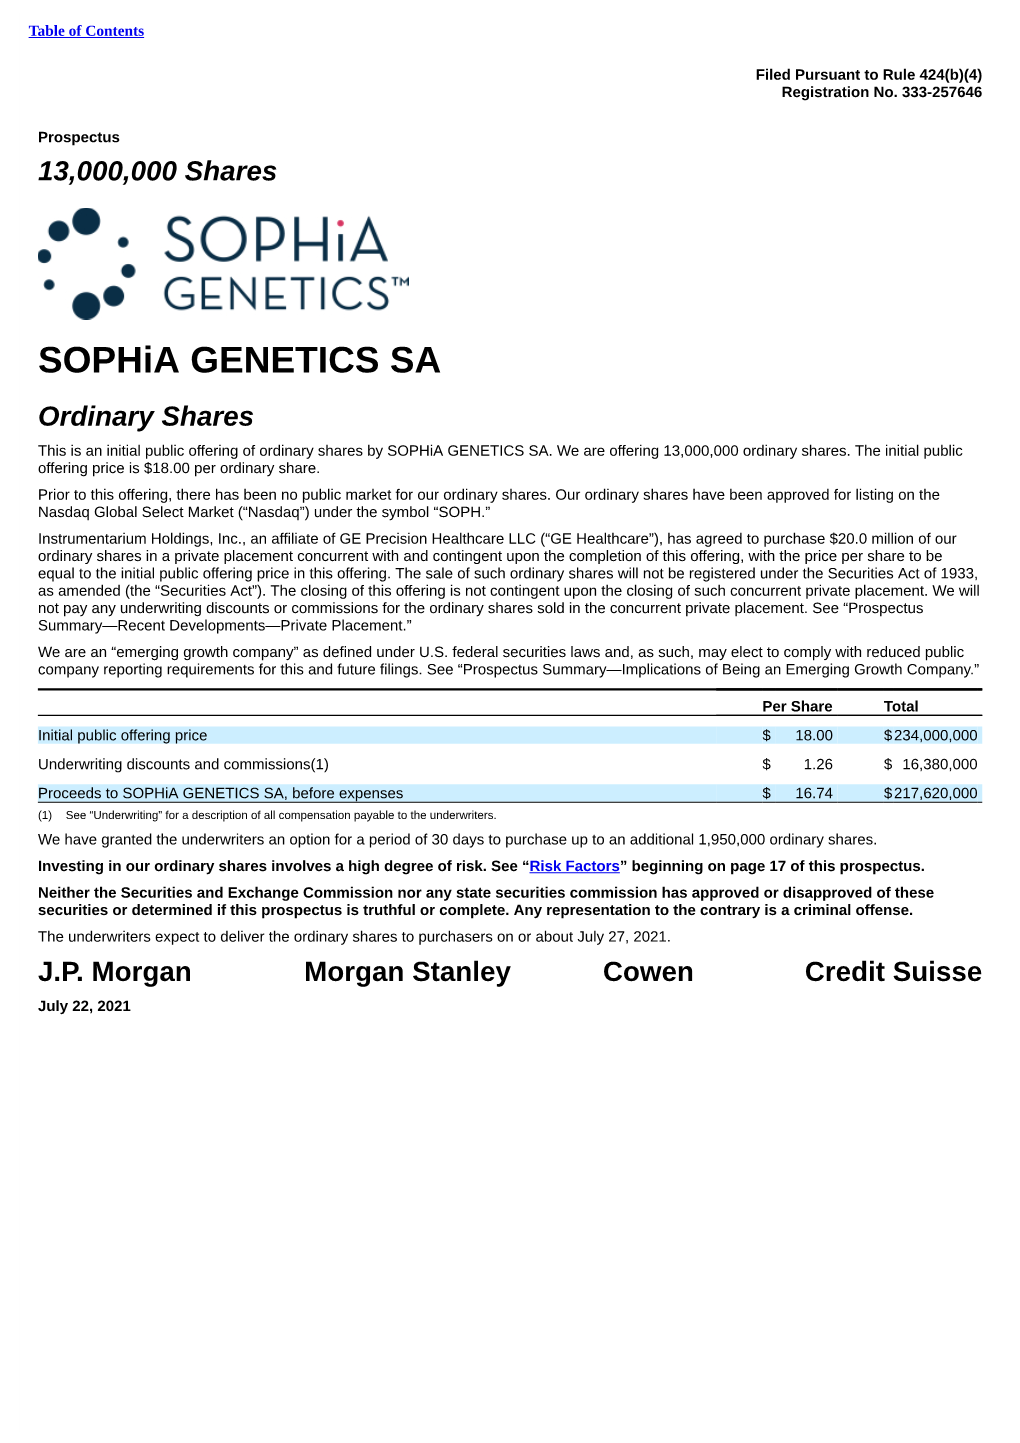 Sophia GENETICS SA Ordinary Shares This Is an Initial Public Offering of Ordinary Shares by Sophia GENETICS SA